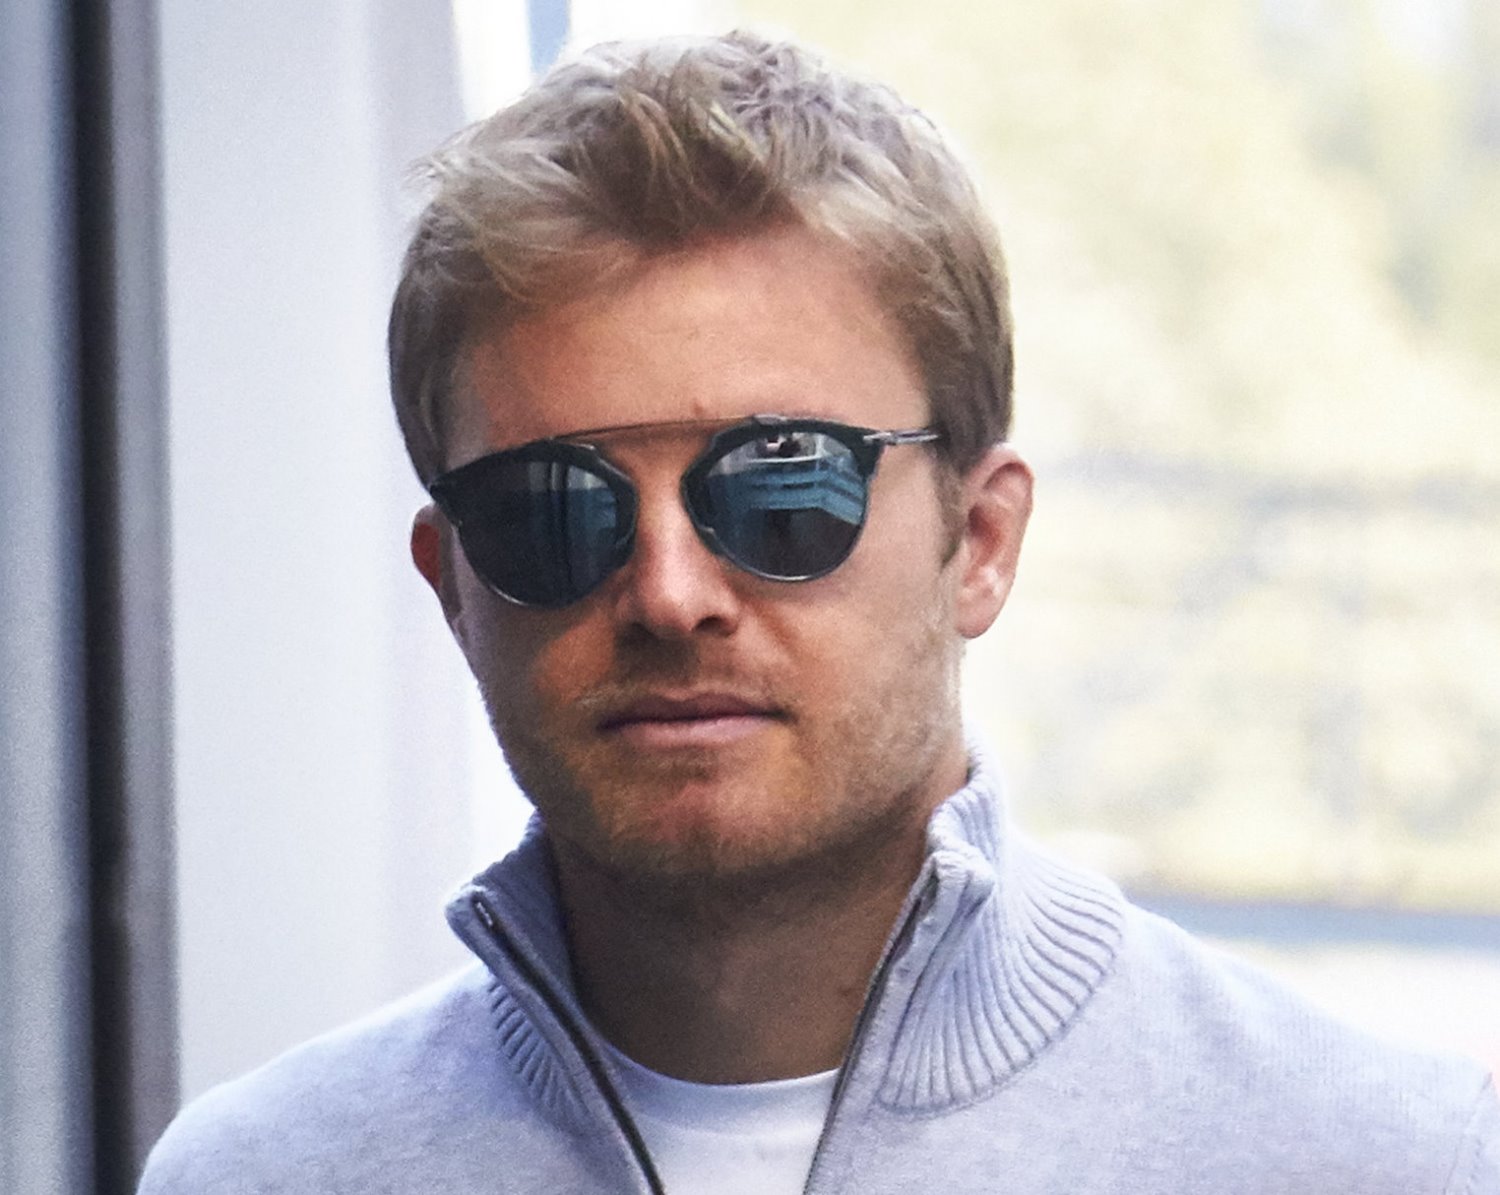 Nico Rosberg hung up his racing gloves for a career in acting